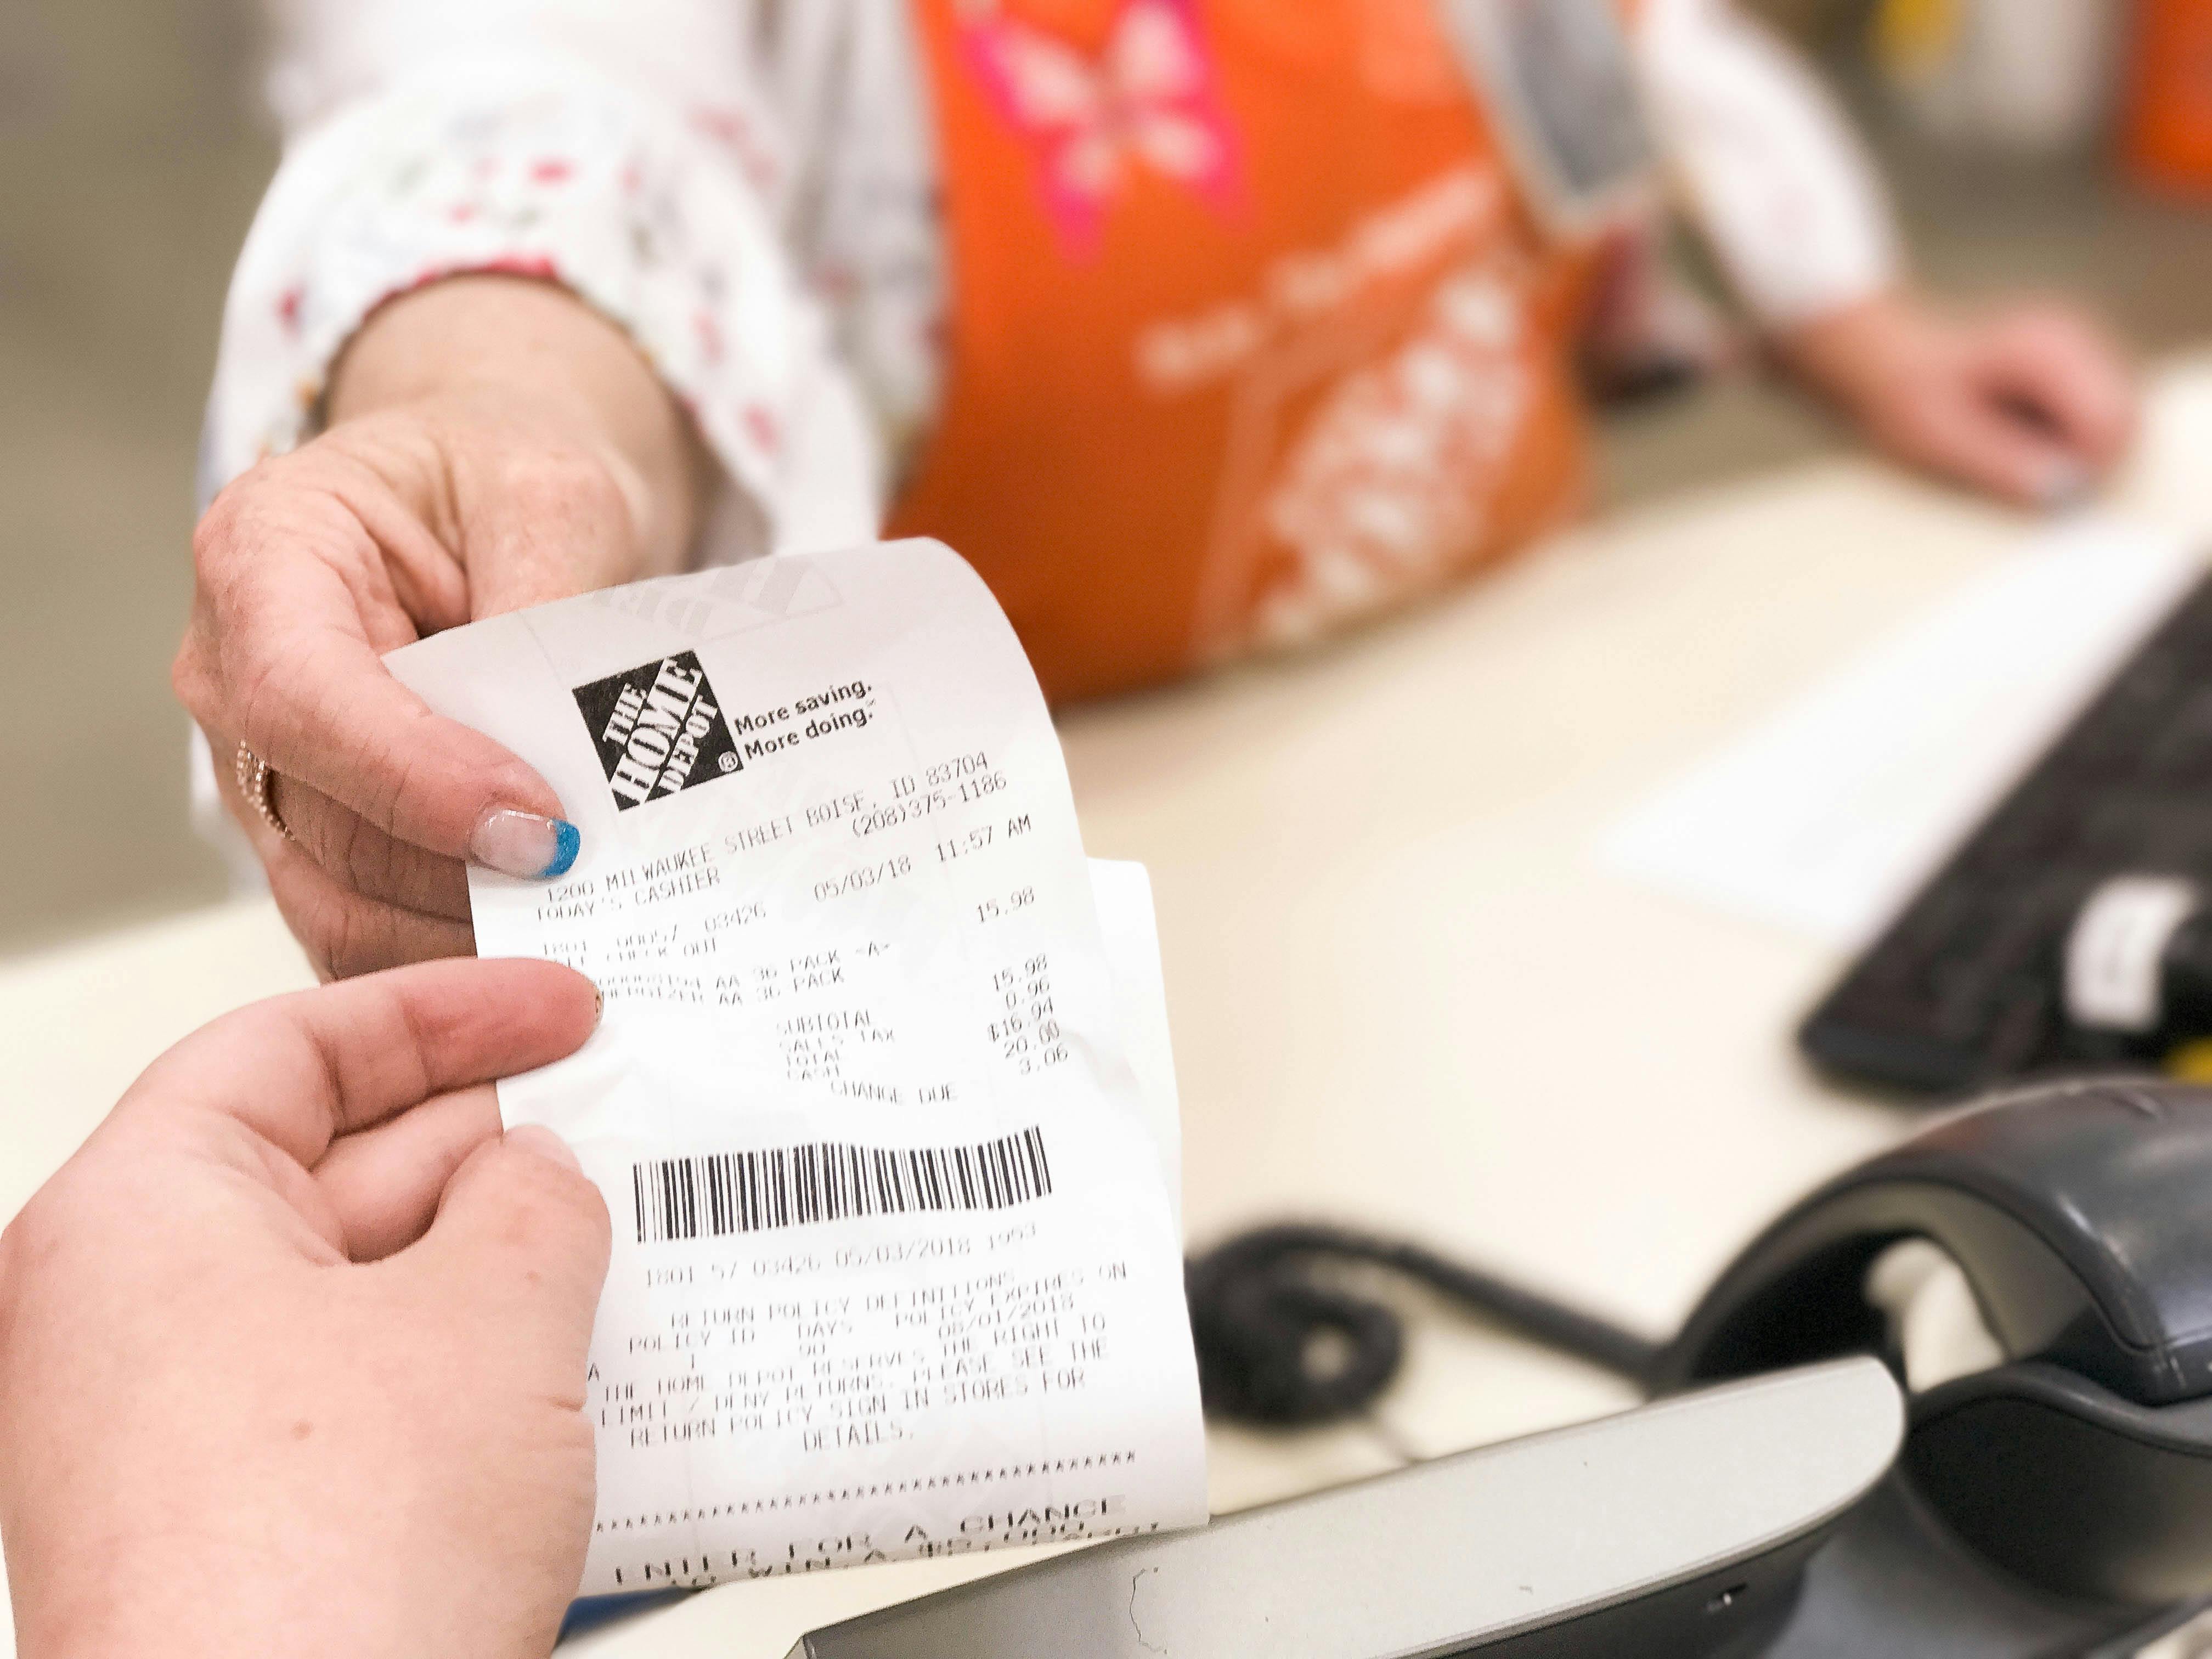 return item to home depot without receipt